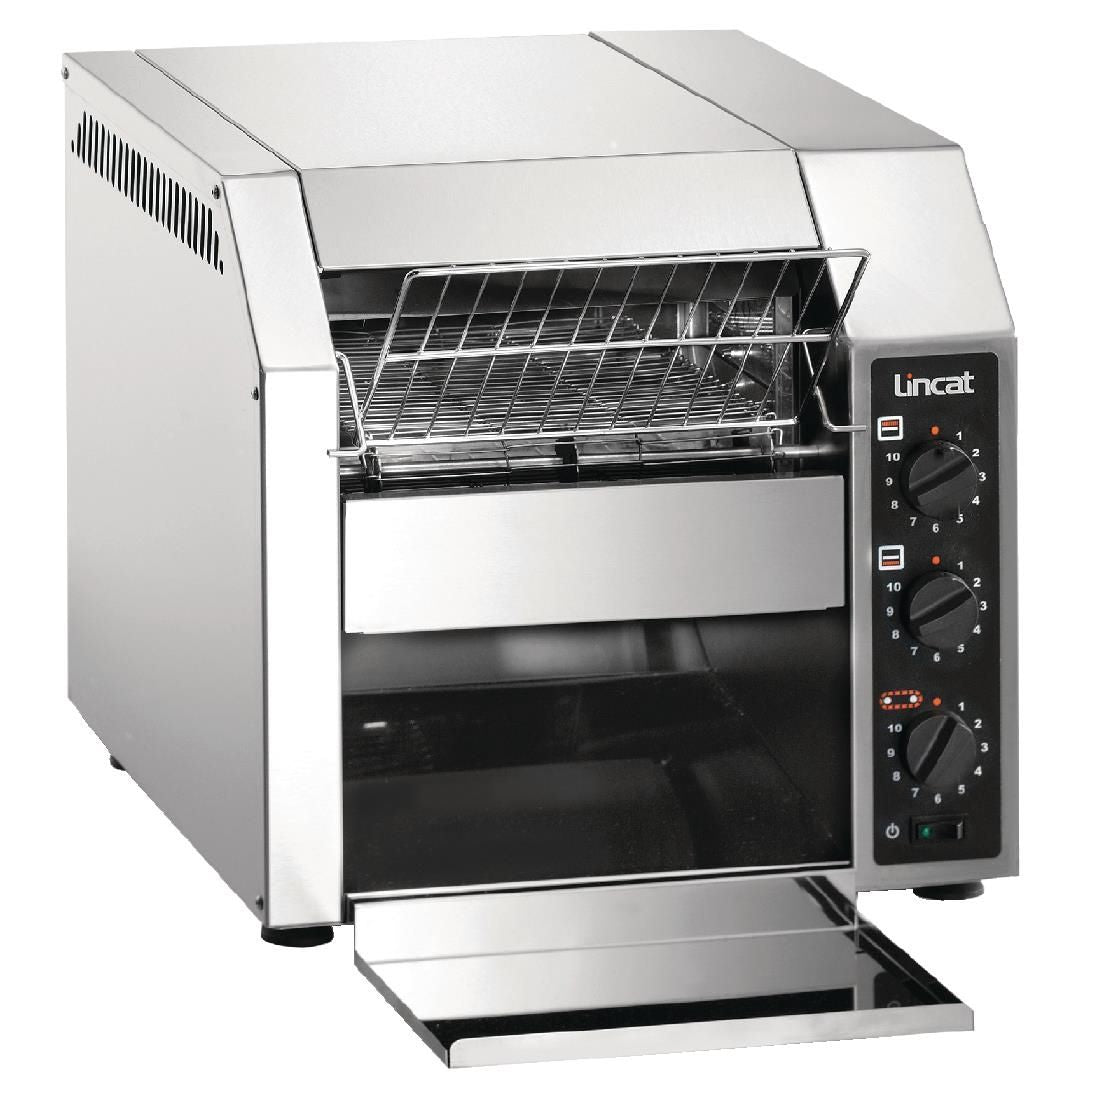 CT1 - Lincat Electric Counter-top Conveyor Toaster - W 410 mm - 2.4 kW CC853 JD Catering Equipment Solutions Ltd